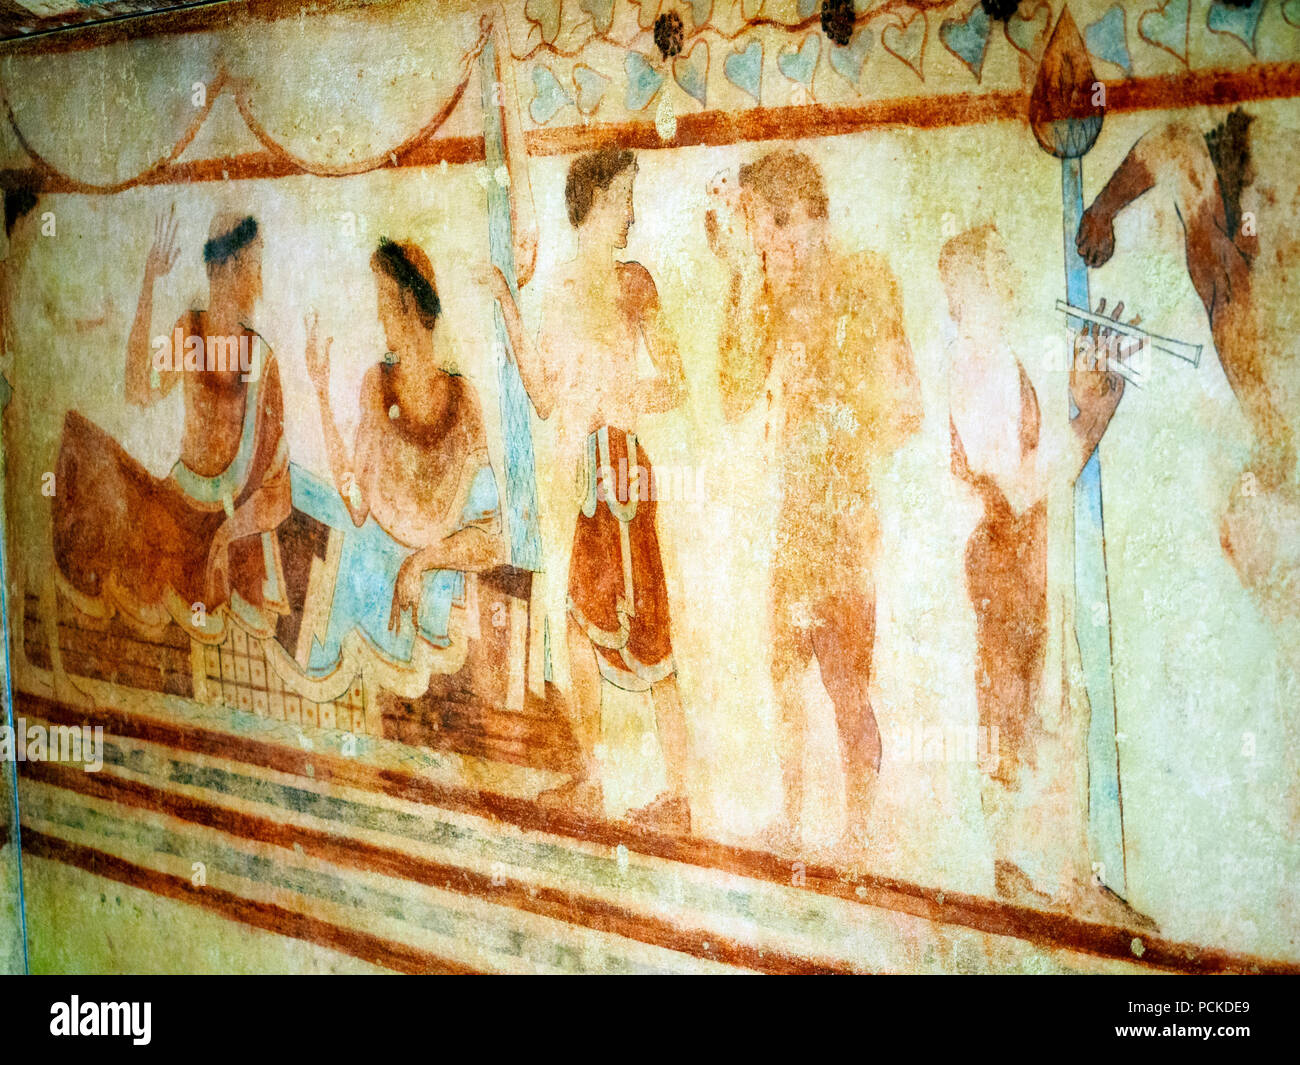 Tomb of the funeral bed decorated walls 470-460 BC - National Etruscan Museum of Villa Giulia - Rome, Italy Stock Photo